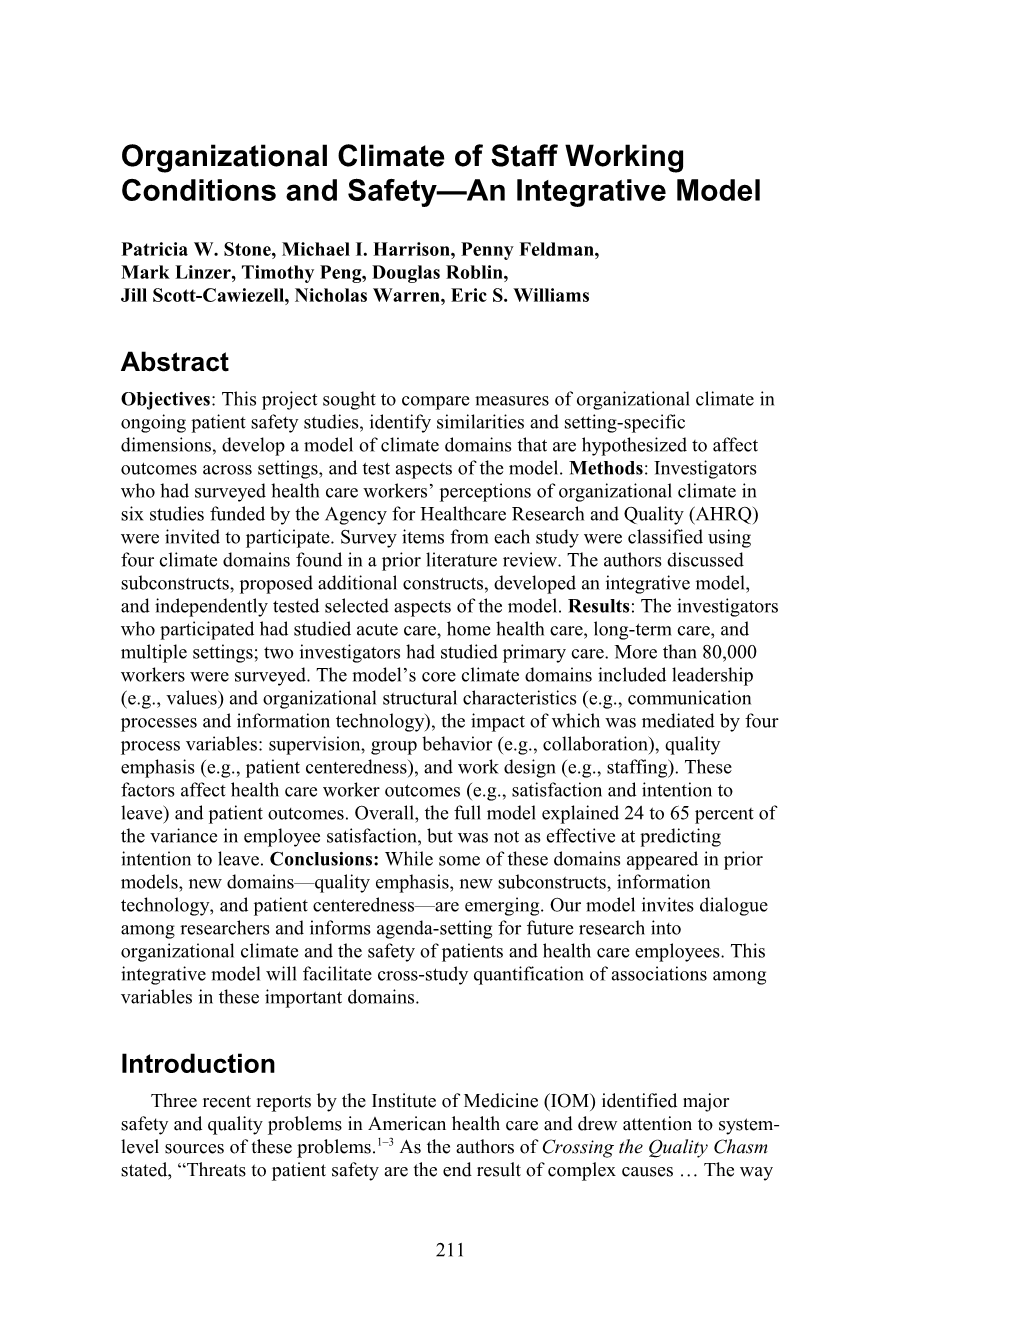 Organizational Climate of Staff Working Conditions and Safety an Integrative Model